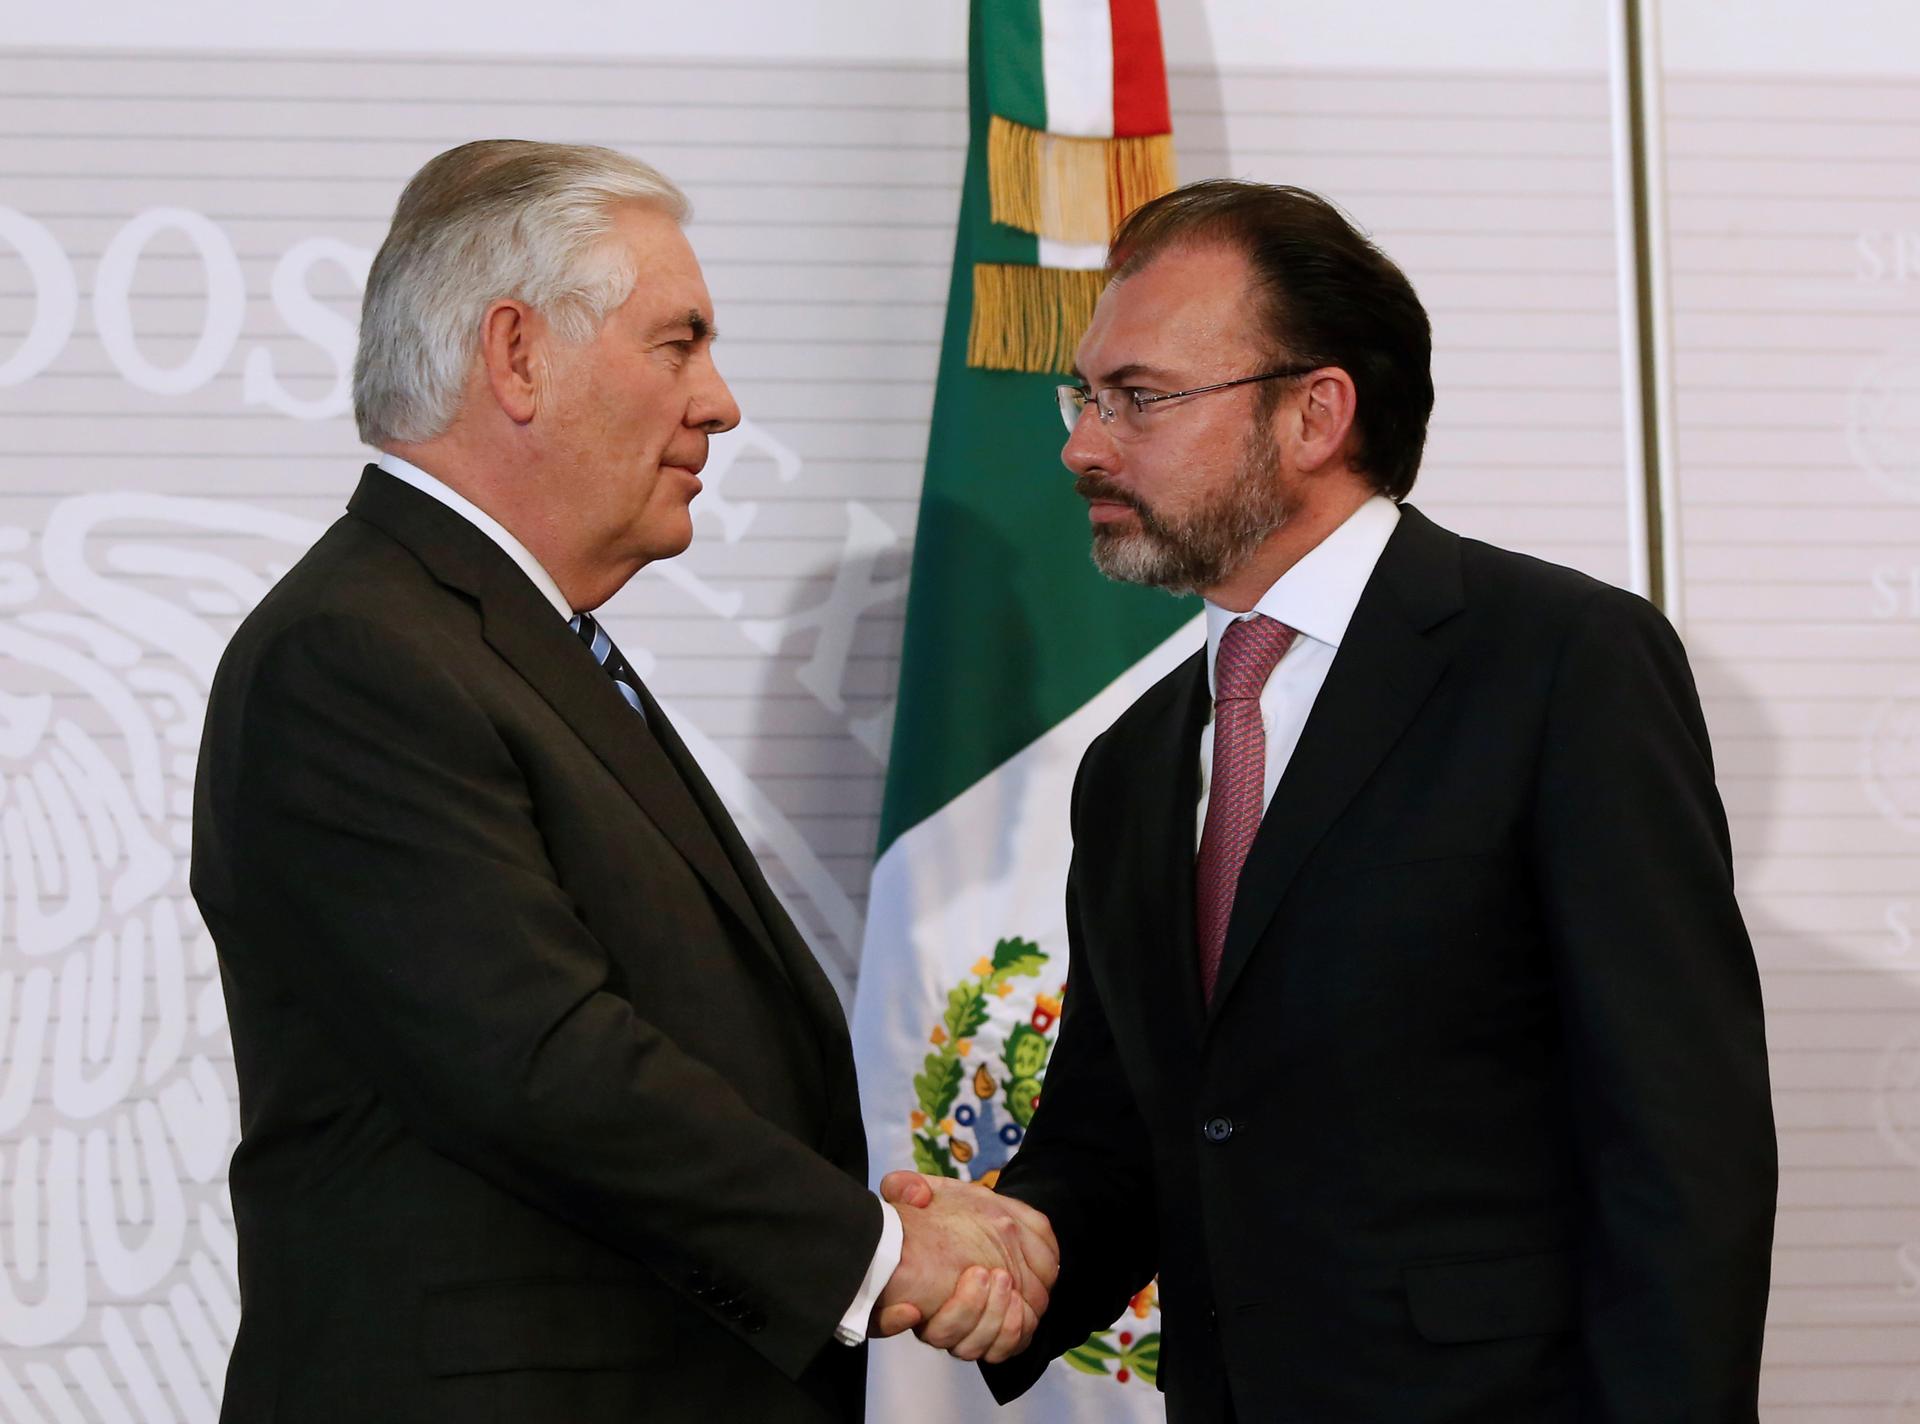 U.S. Secretary of State Rex Tillerson (L) and Mexico's Foreign Minister Luis Videgaray shake hands after a joint news conference at the foreign ministry in Mexico City, Mexico February 23, 2017.